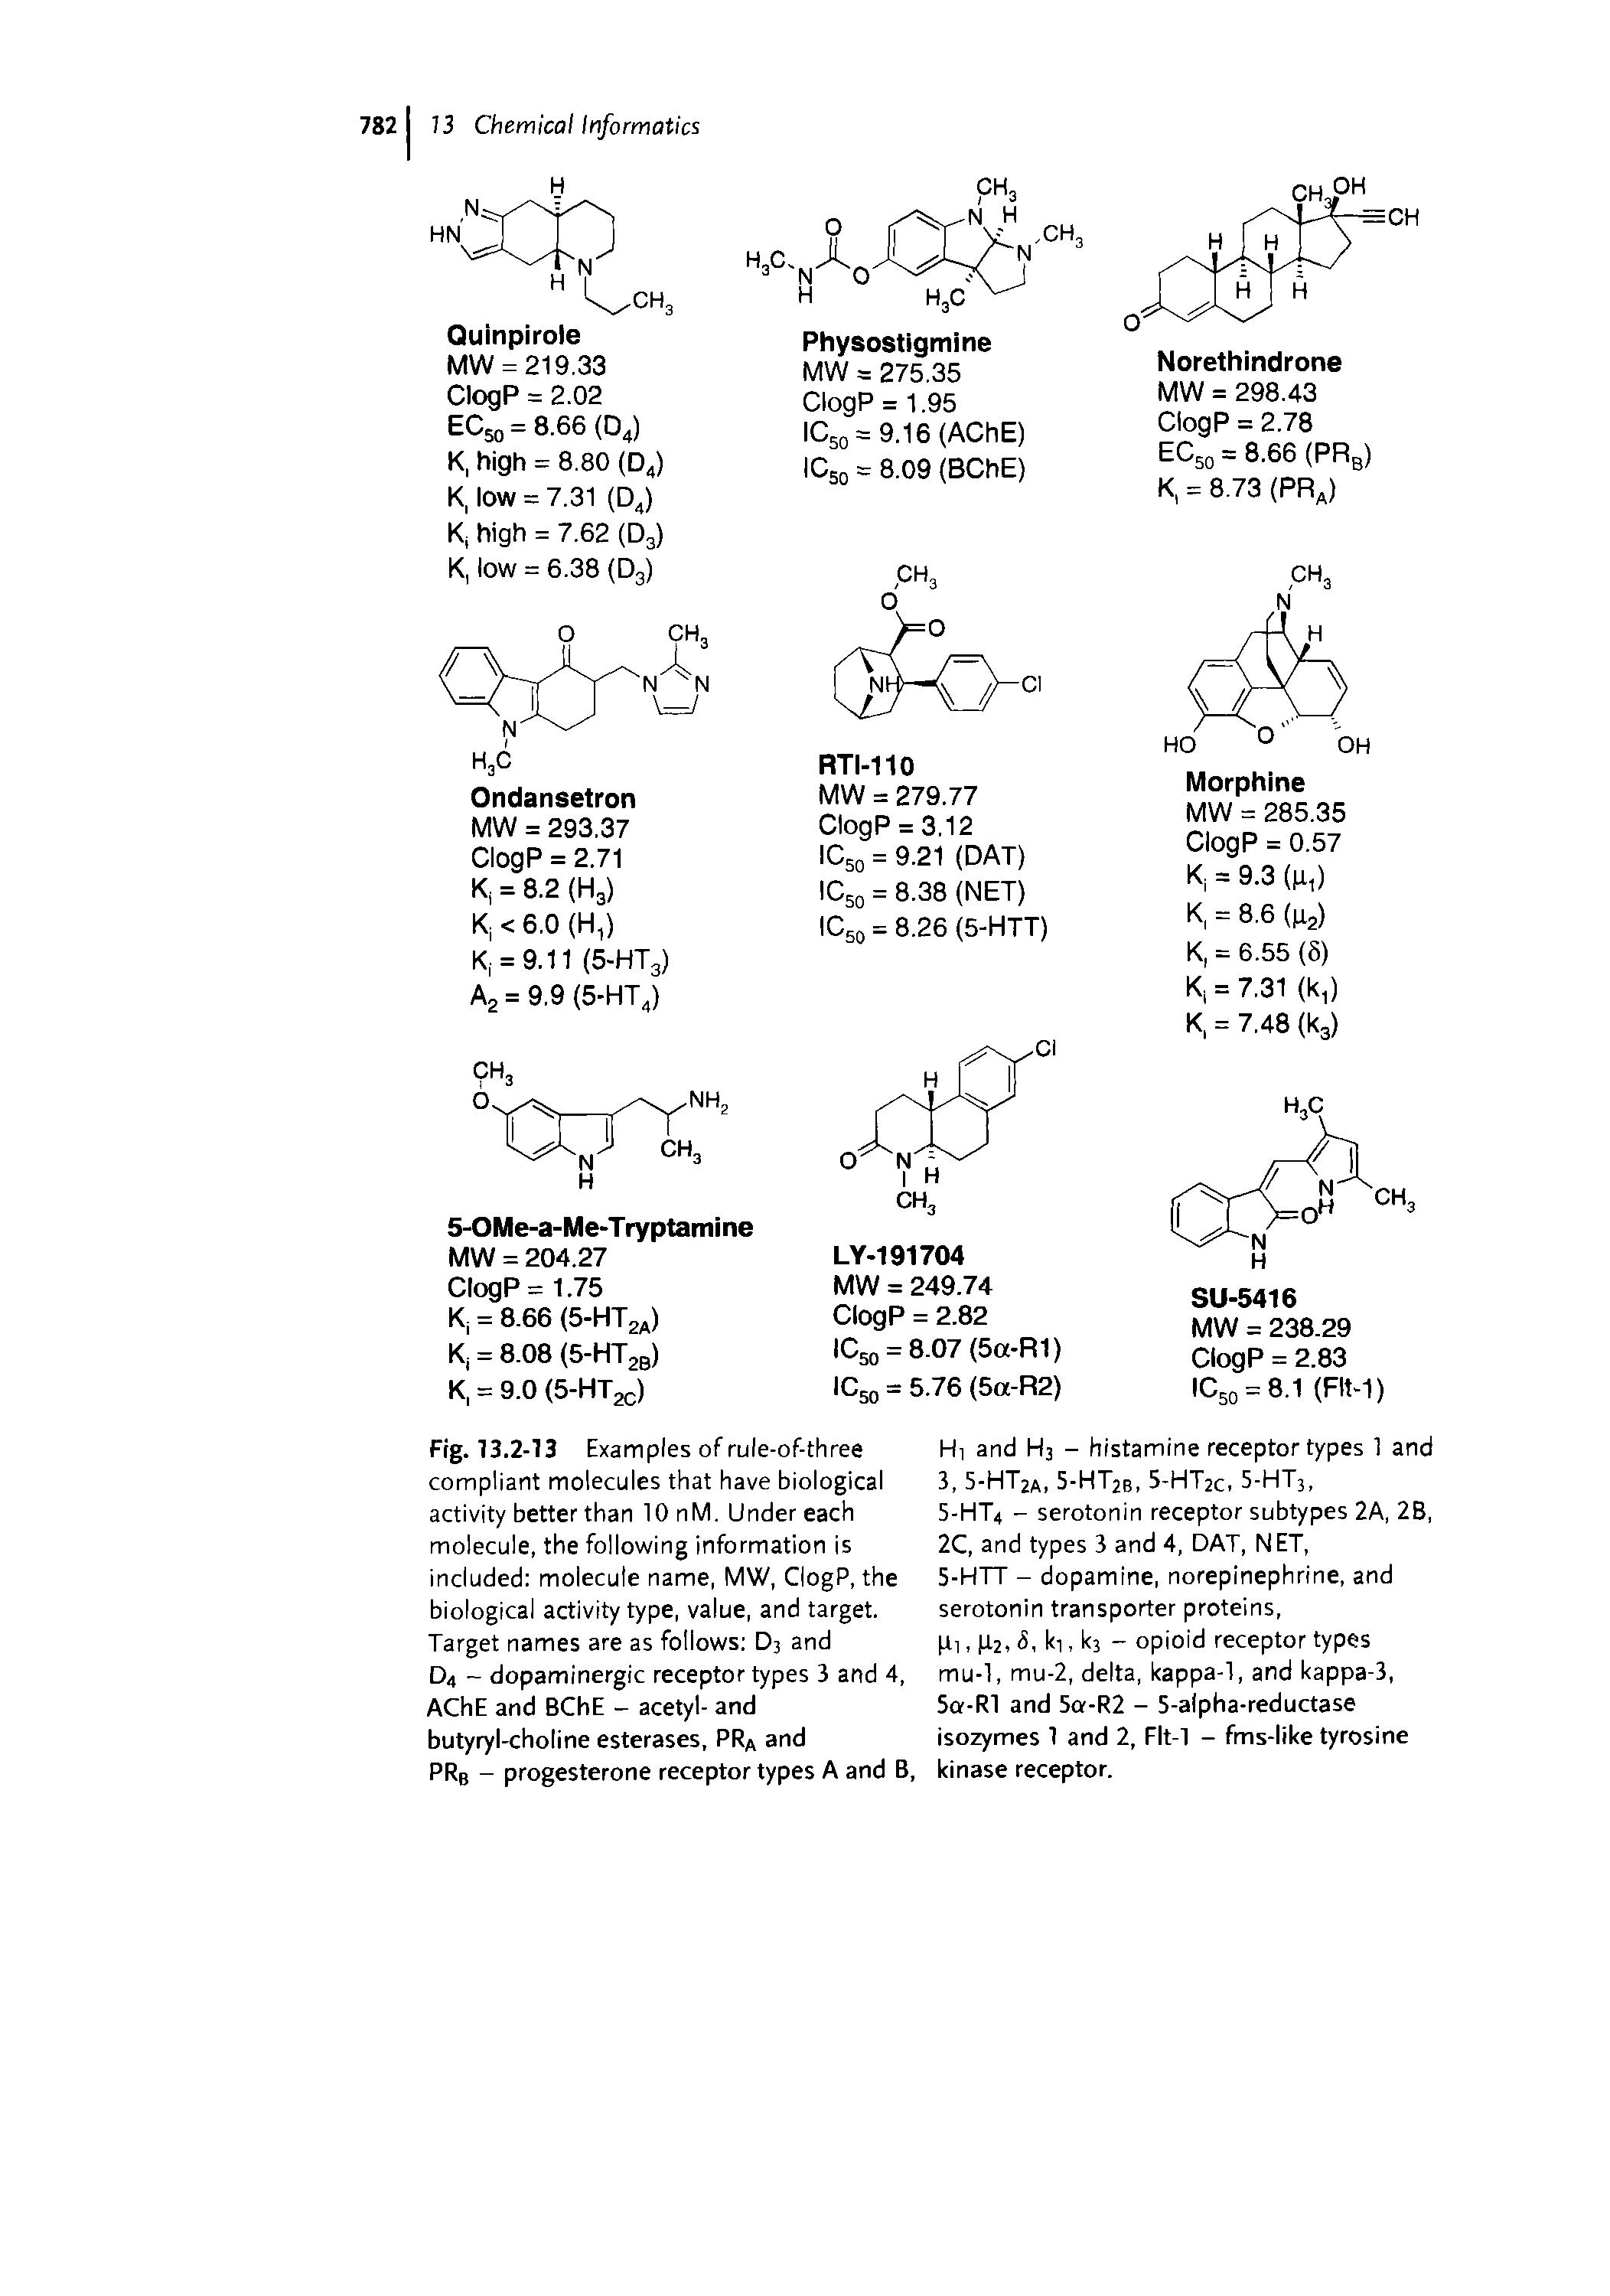 Fig. 13.2-13 Examples of rule-of-three compliant molecules that have biological activity better than 10 nM. Under each molecule, the following information is included molecule name, MW, ClogP, the biological activity type, value, and target. Target names are as follows D3 and D4 - dopaminergic receptor types 3 and 4, AChE and BChE - acetyl- and butyryl-choline esterases, PRA and PRb - progesterone receptor types A and B,...